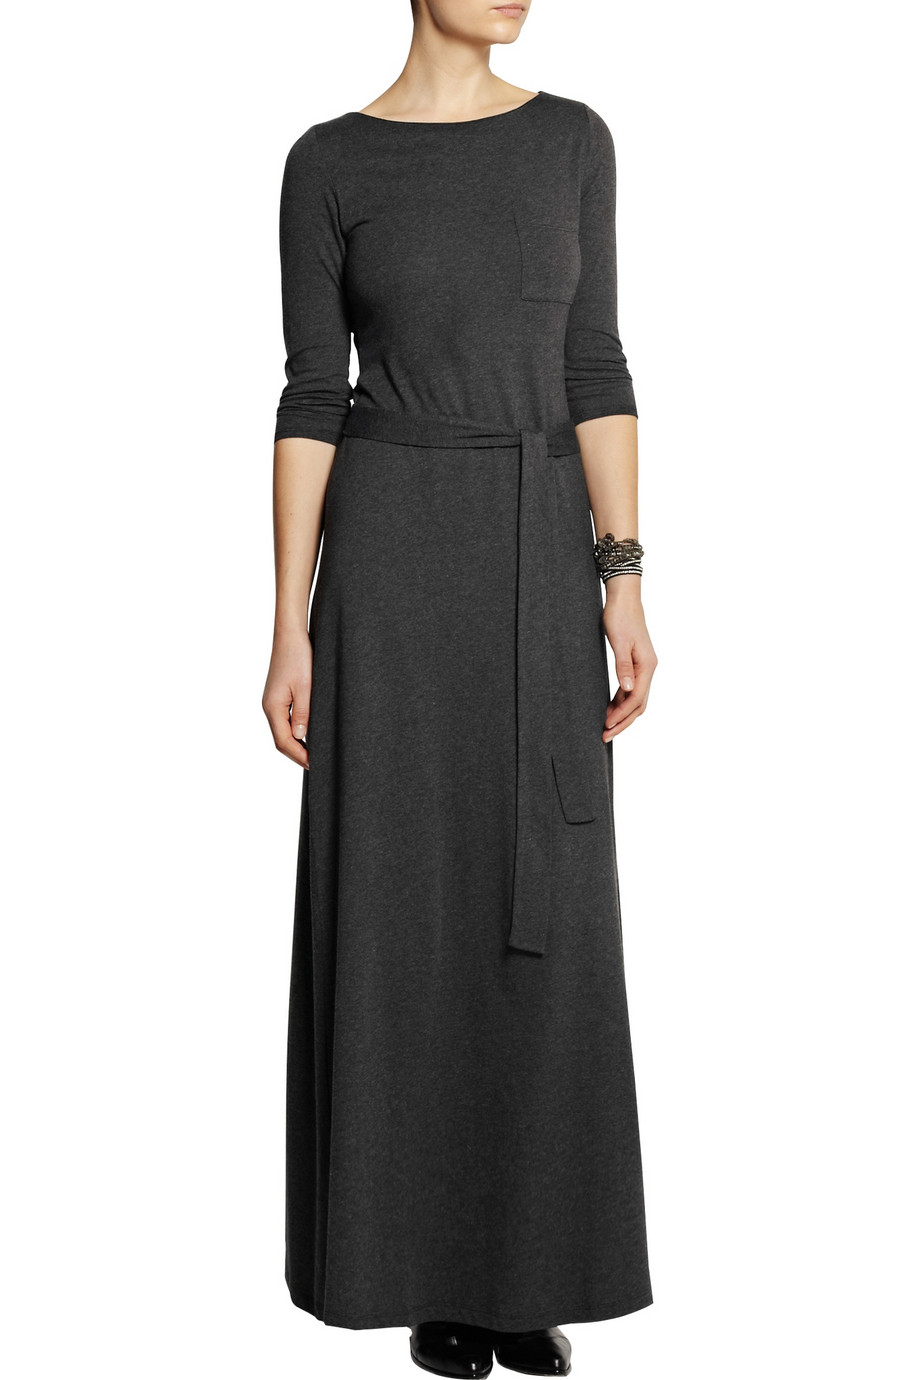 Chinti & parker Cotton And Modal-Blend Jersey Maxi Dress in Gray | Lyst